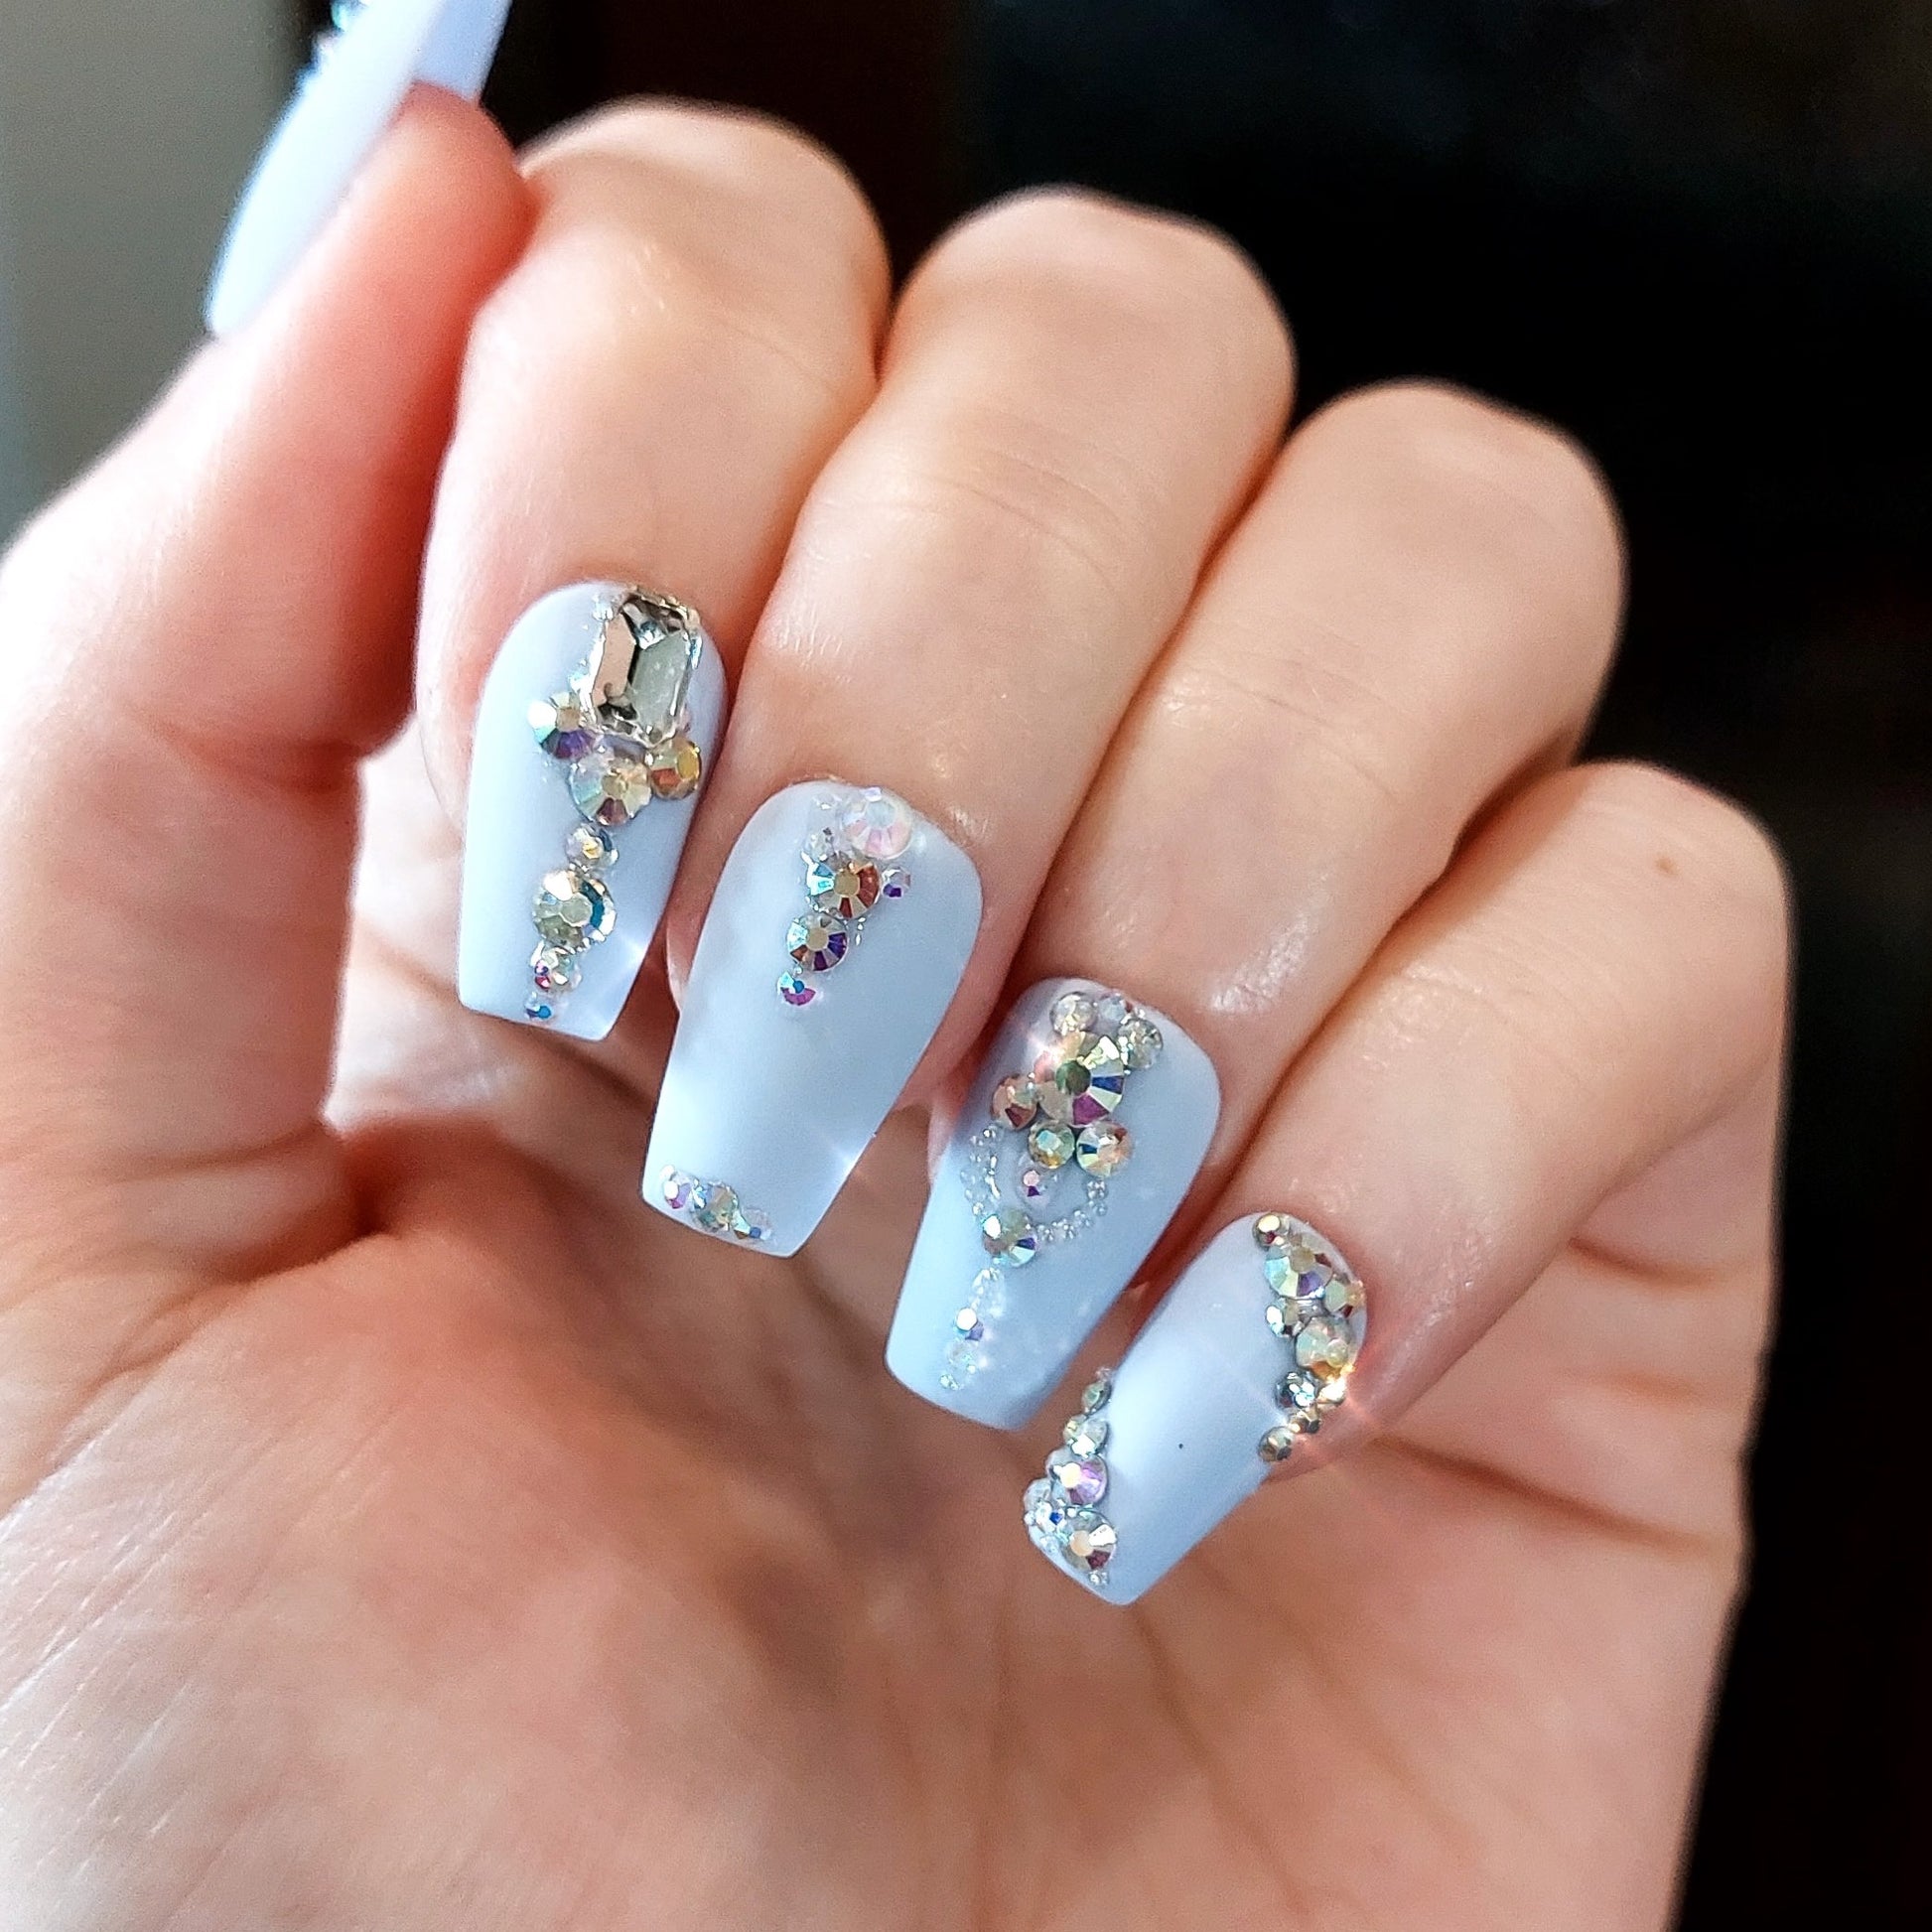 Custom press on nails. Periwinkle press on nails with a variety of crystals on a short coffin nail shape.